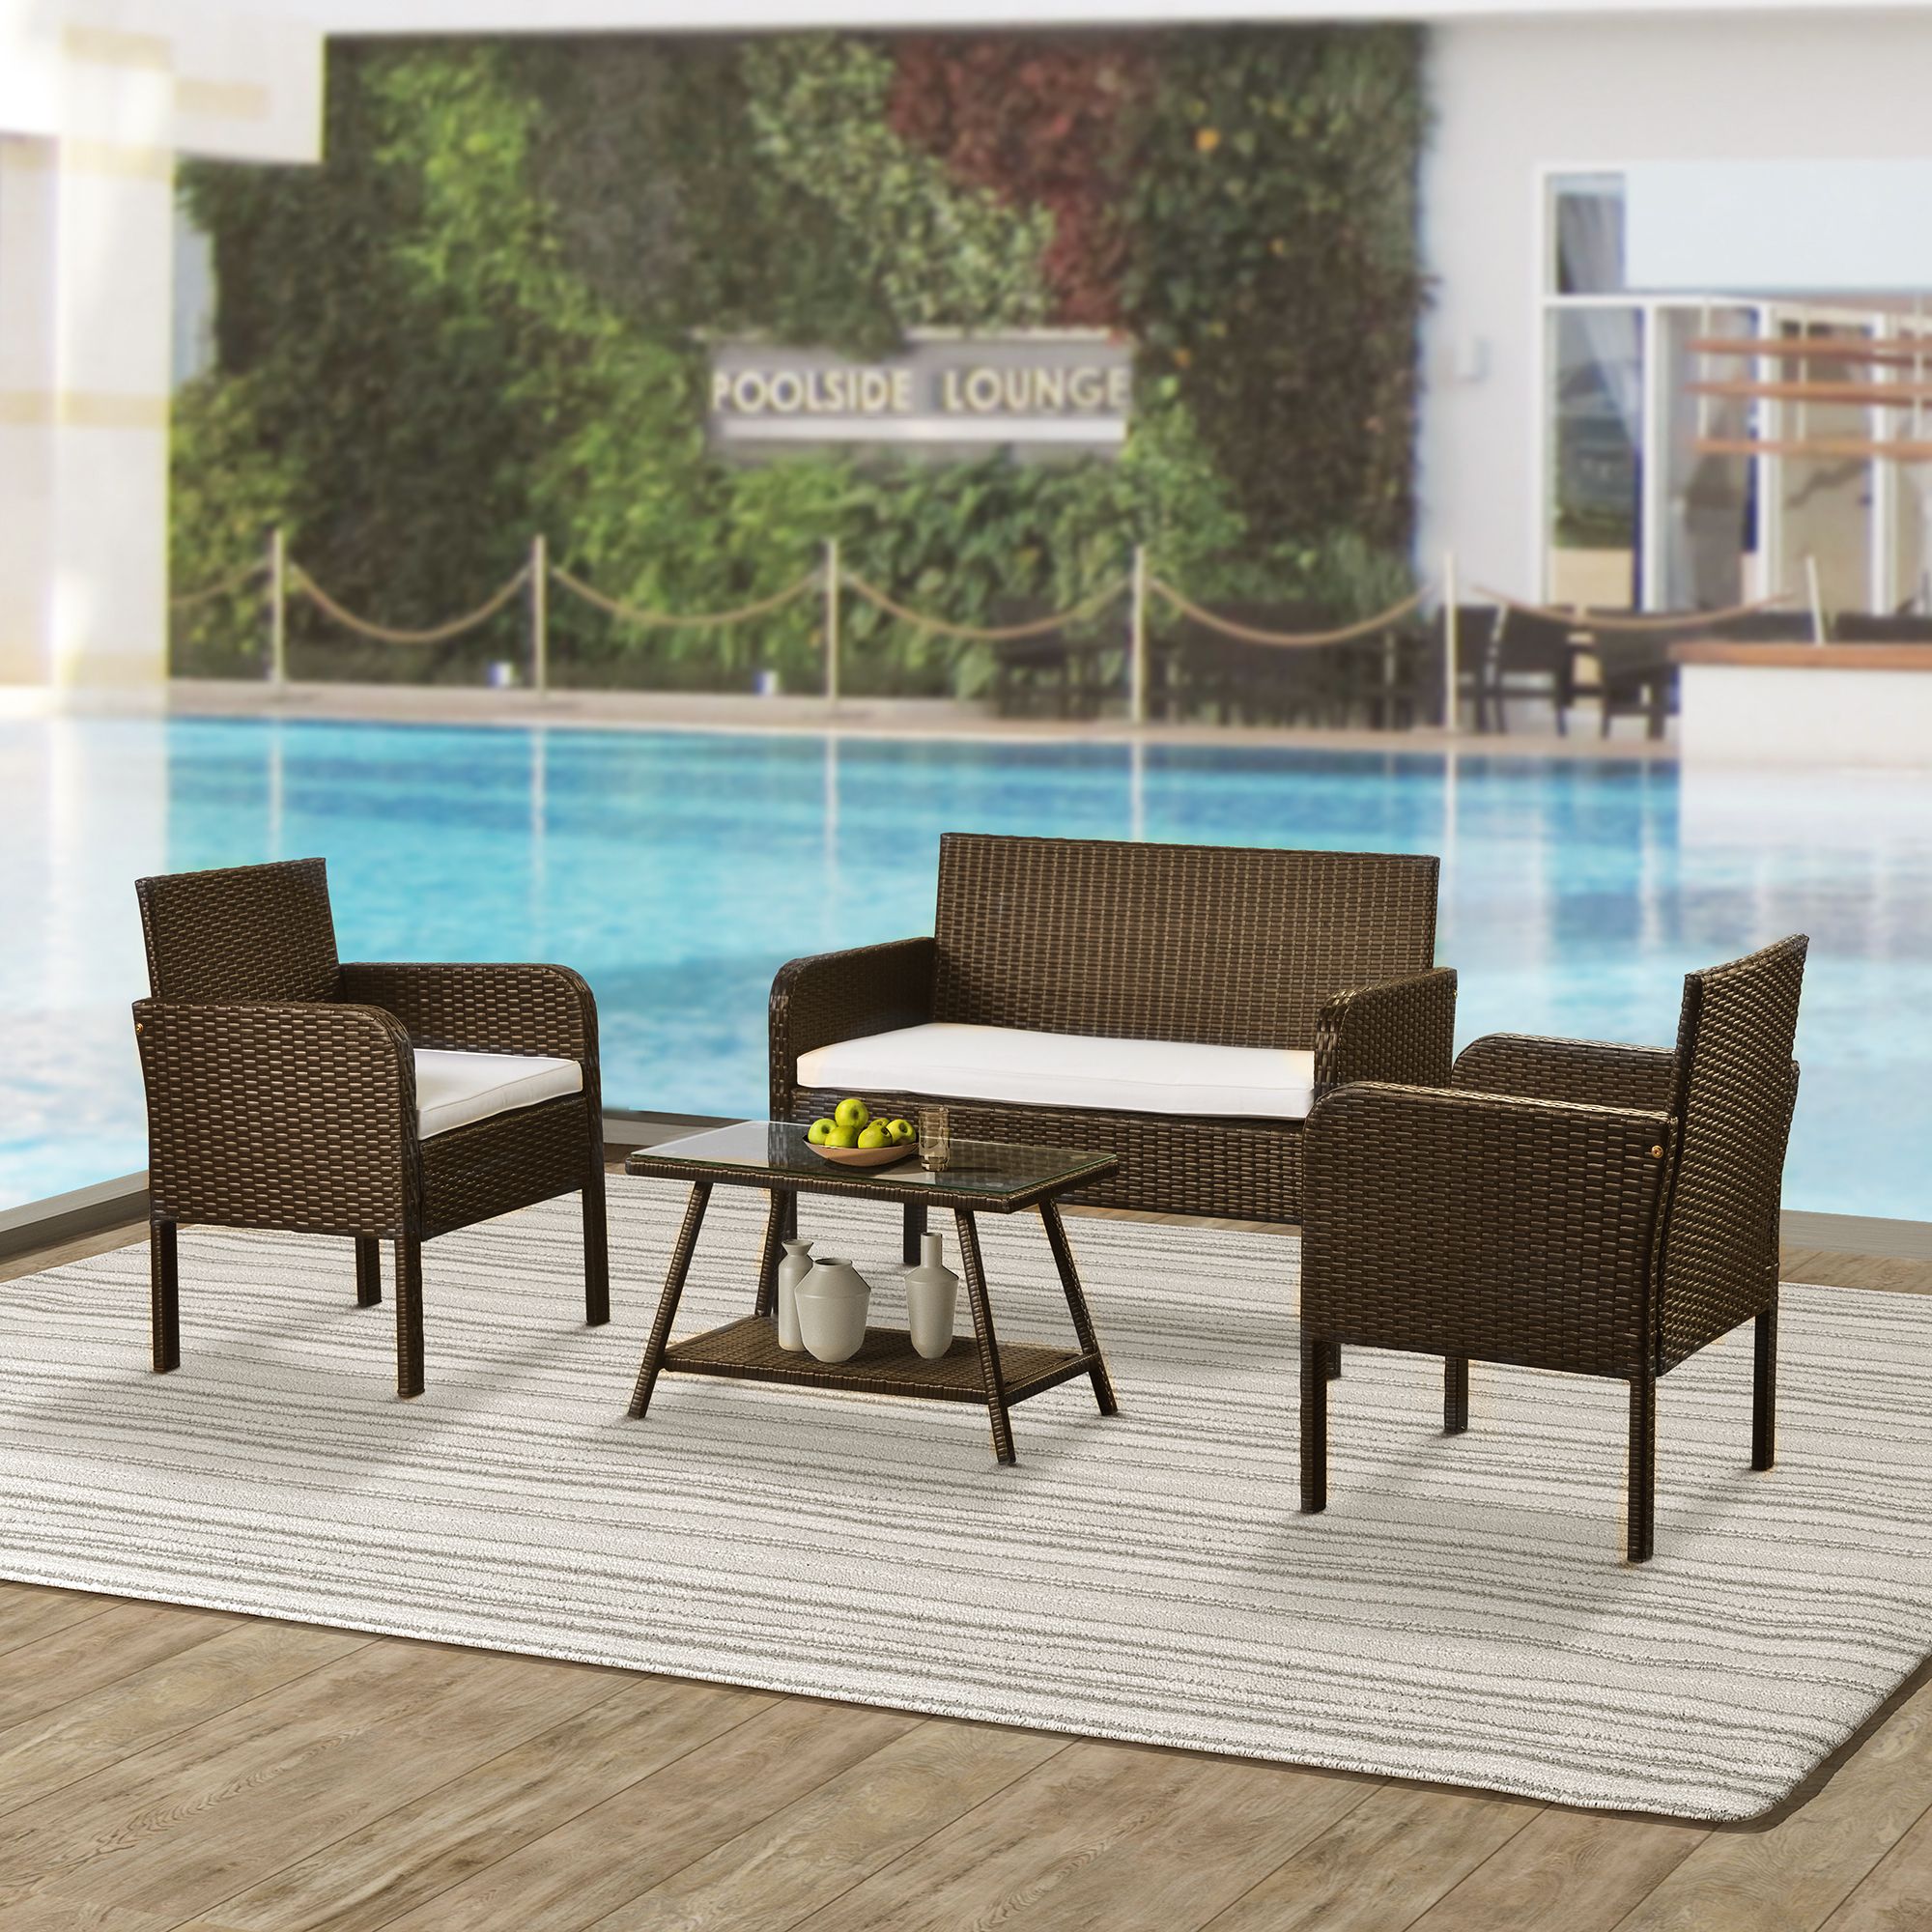 4 Piece Outdoor Patio Furniture Set, Pe Rattan Wicker Sofa Set, Outdoor Pertaining To 4 Piece Wicker Outdoor Seating Sets (View 13 of 15)